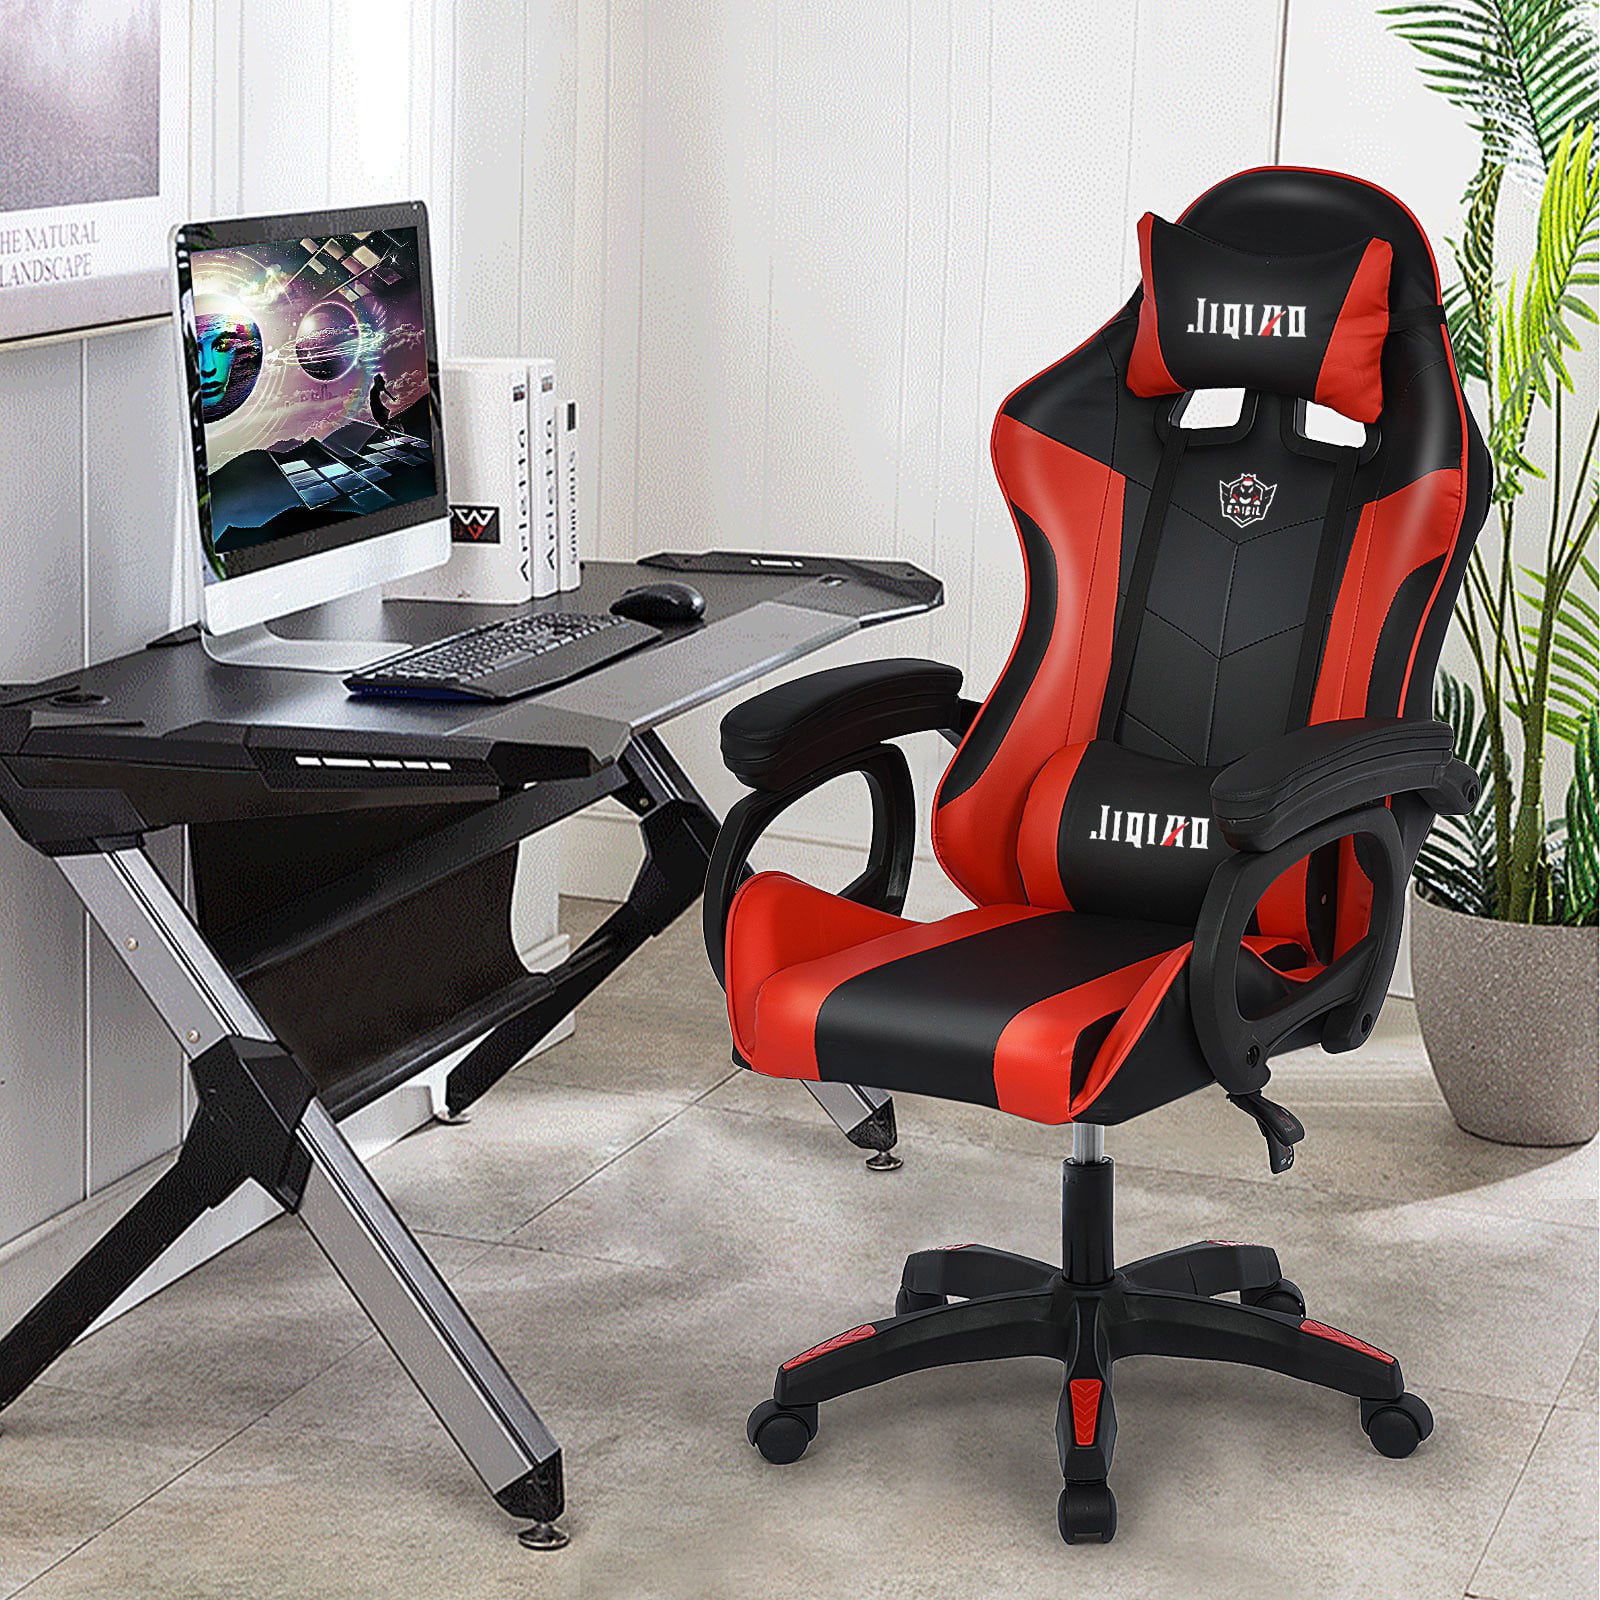 Details about   White Ergonomic Leather Racing Computer Game Chair Office Desk Swivel MidBack US 